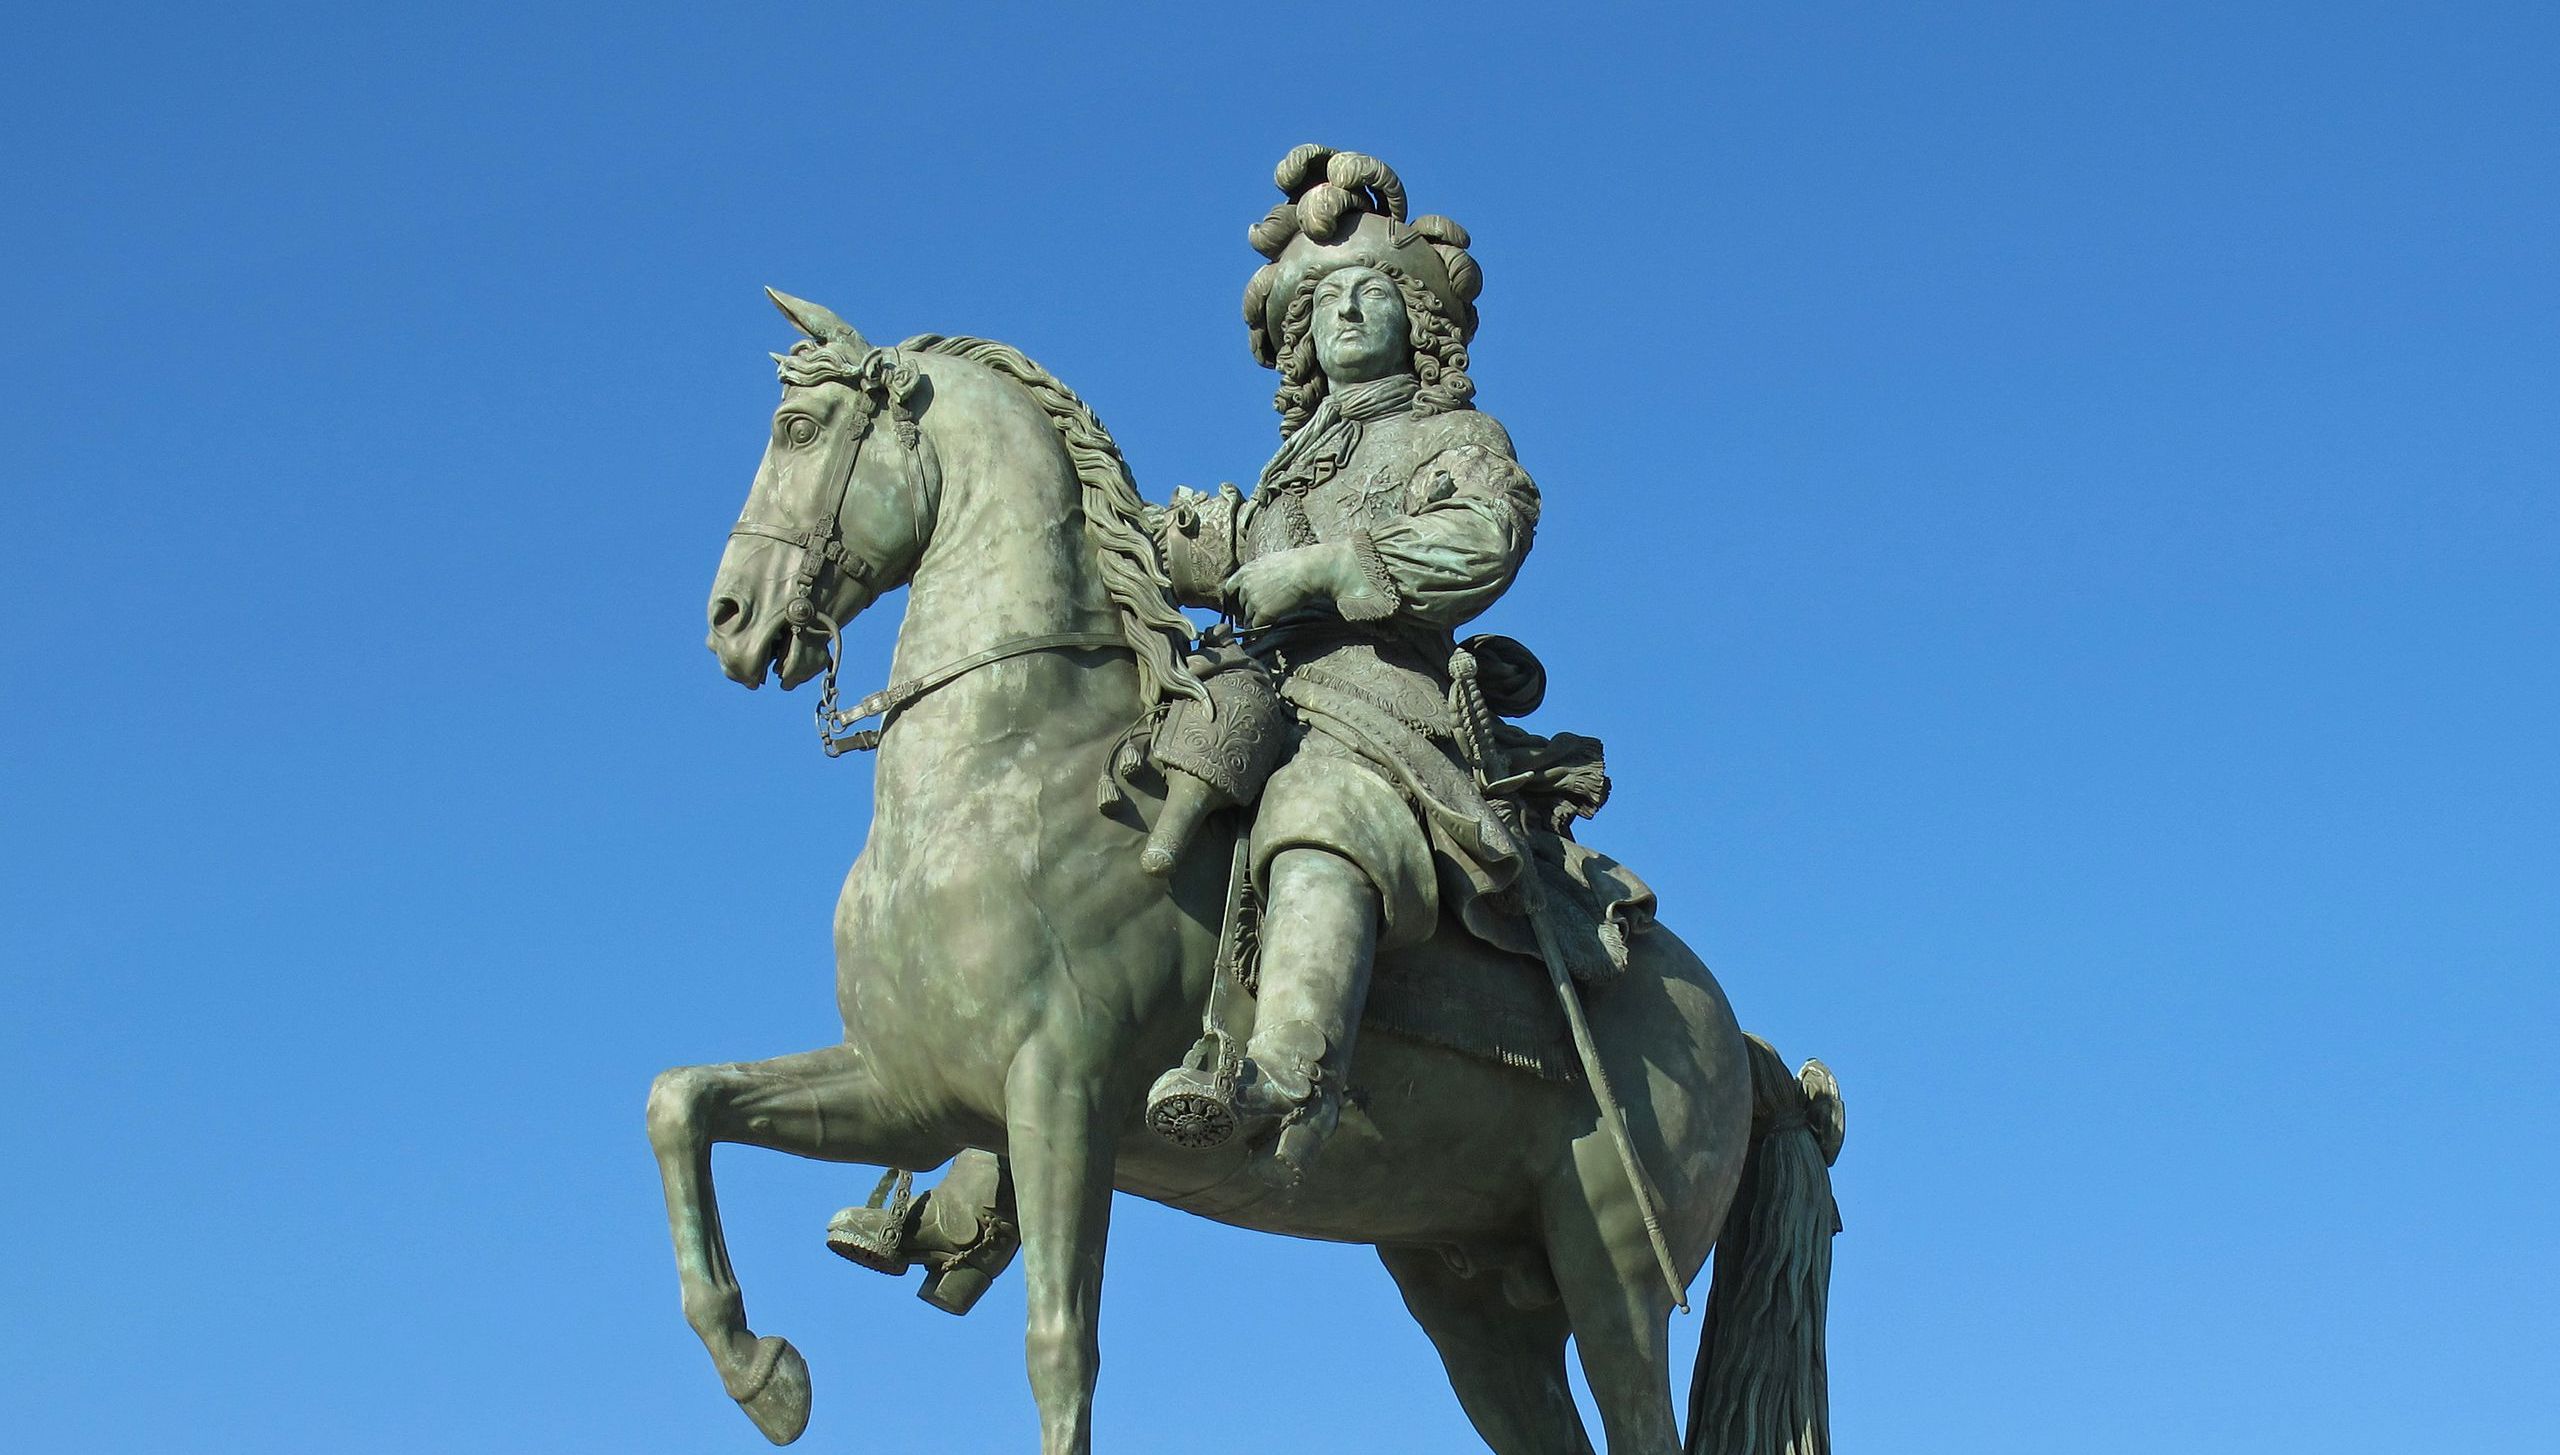 Statue_of_Louis_XIV_in_place_d'armes_of_Versailles_3_v